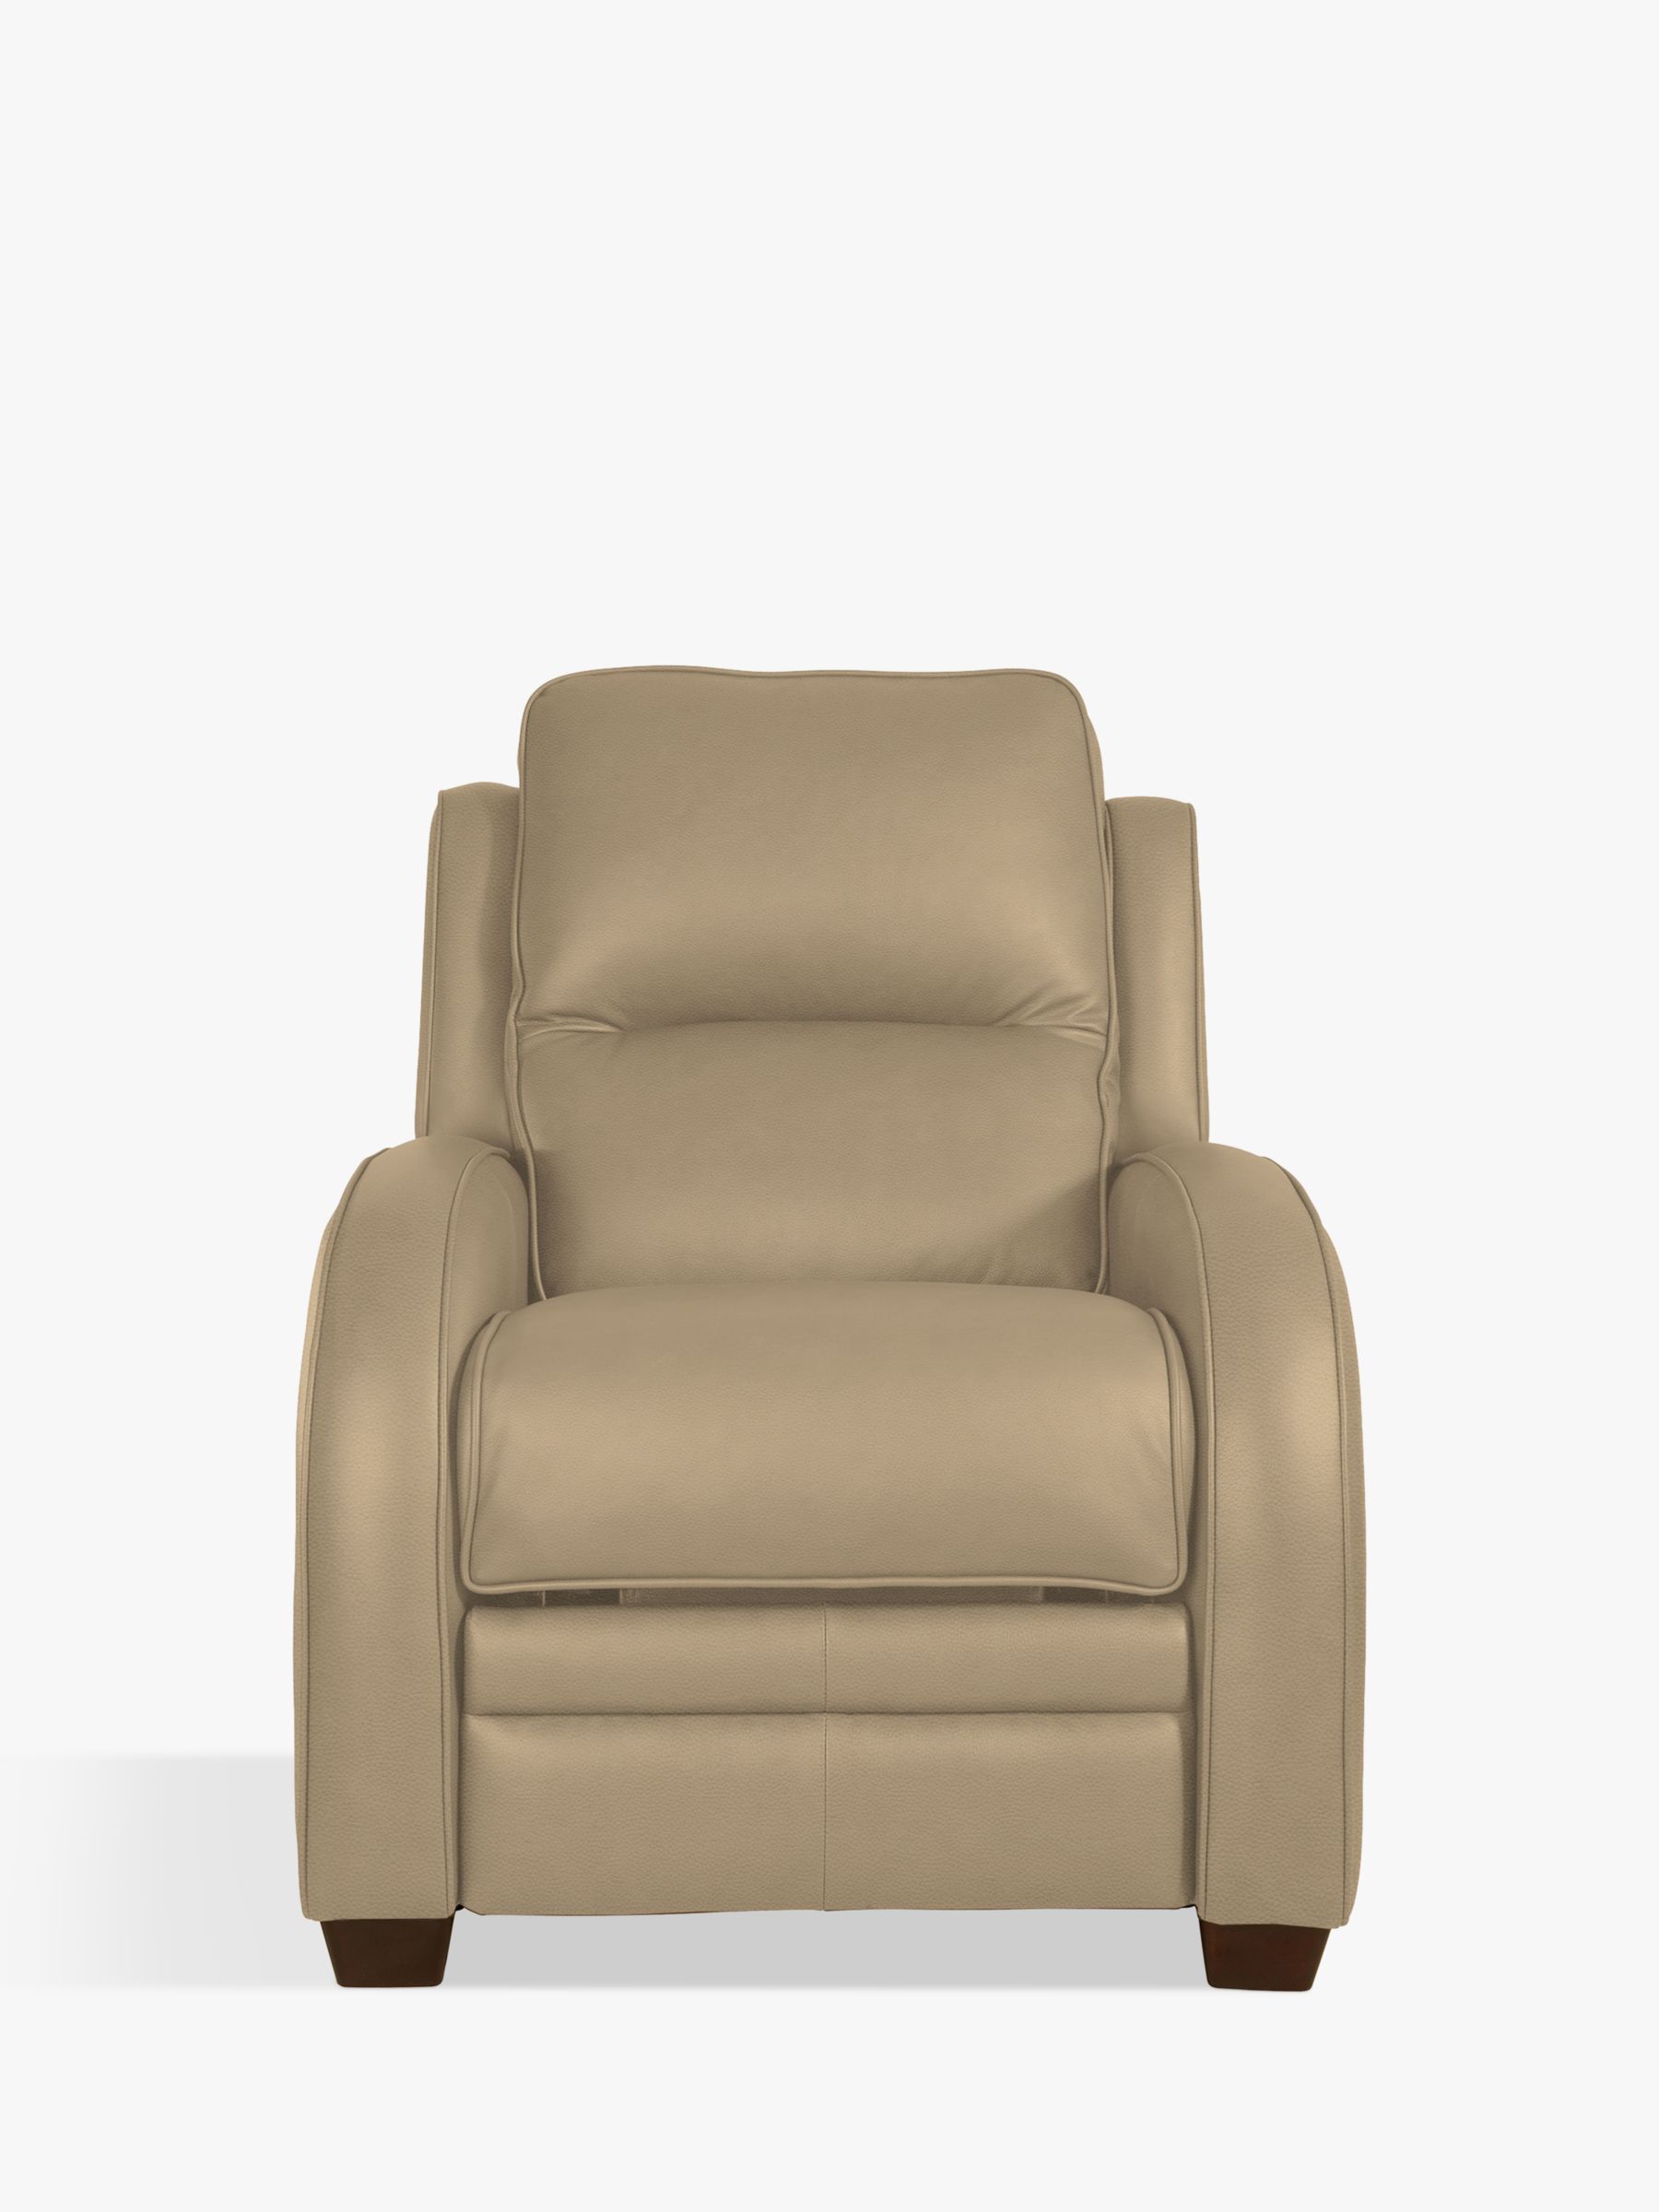 Charleston Range, Parker Knoll Charleston Leather Power Recliner Armchair, Como Taupe Leather